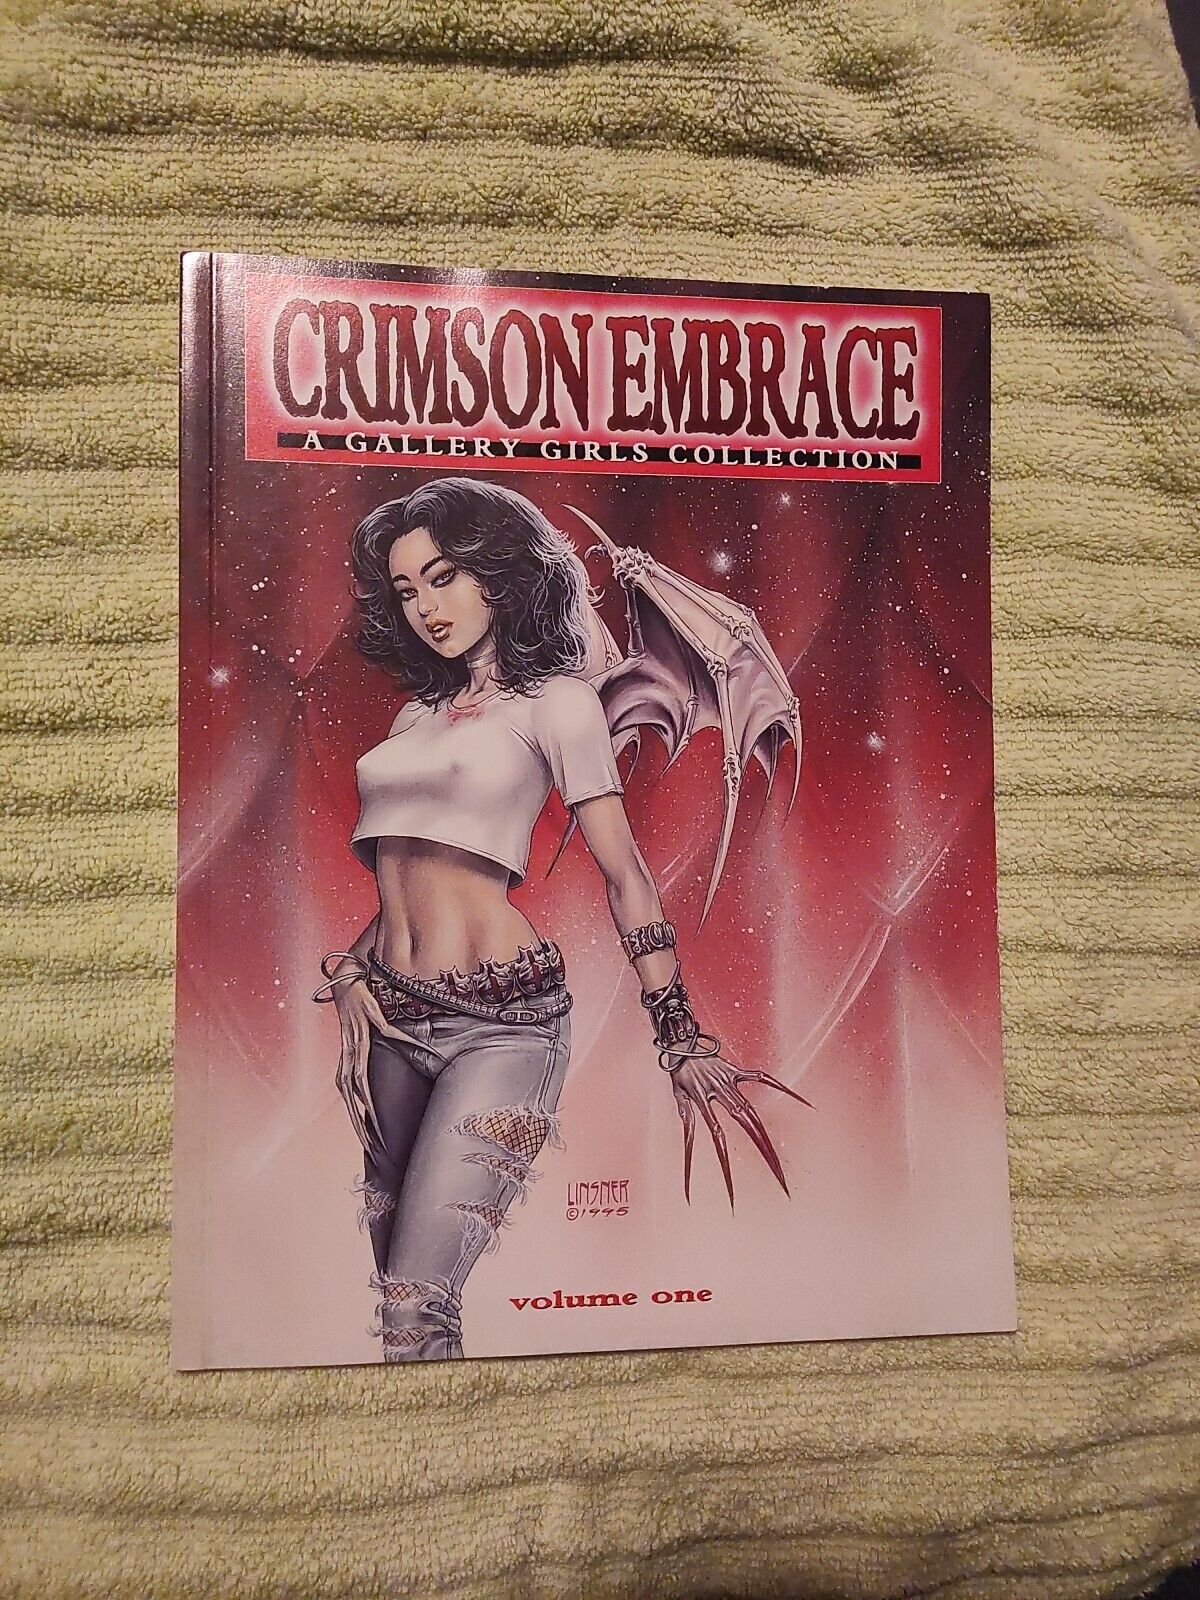 1995 CRIMSON EMBRACE Volume One 1 Joseph Linsner Cover Gallery Girls Collection